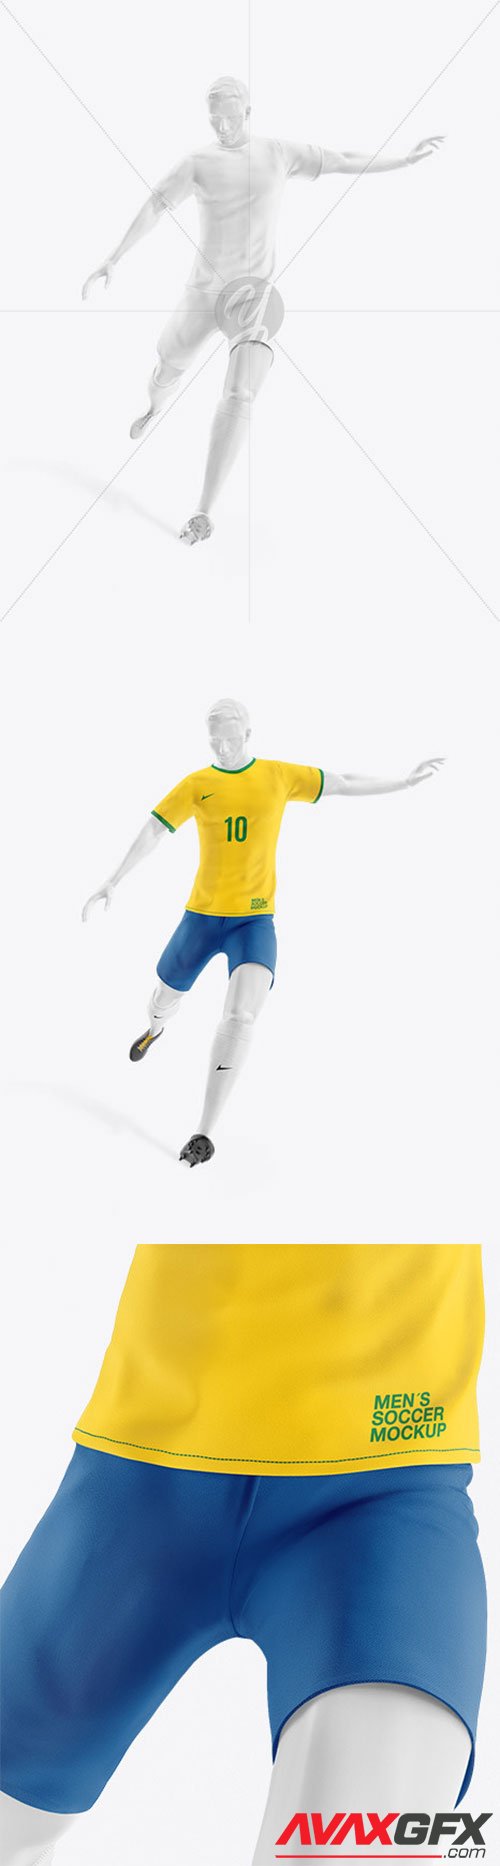 Download Soccer Team Kit Mockup with Mannequin - Front View 62414 ...